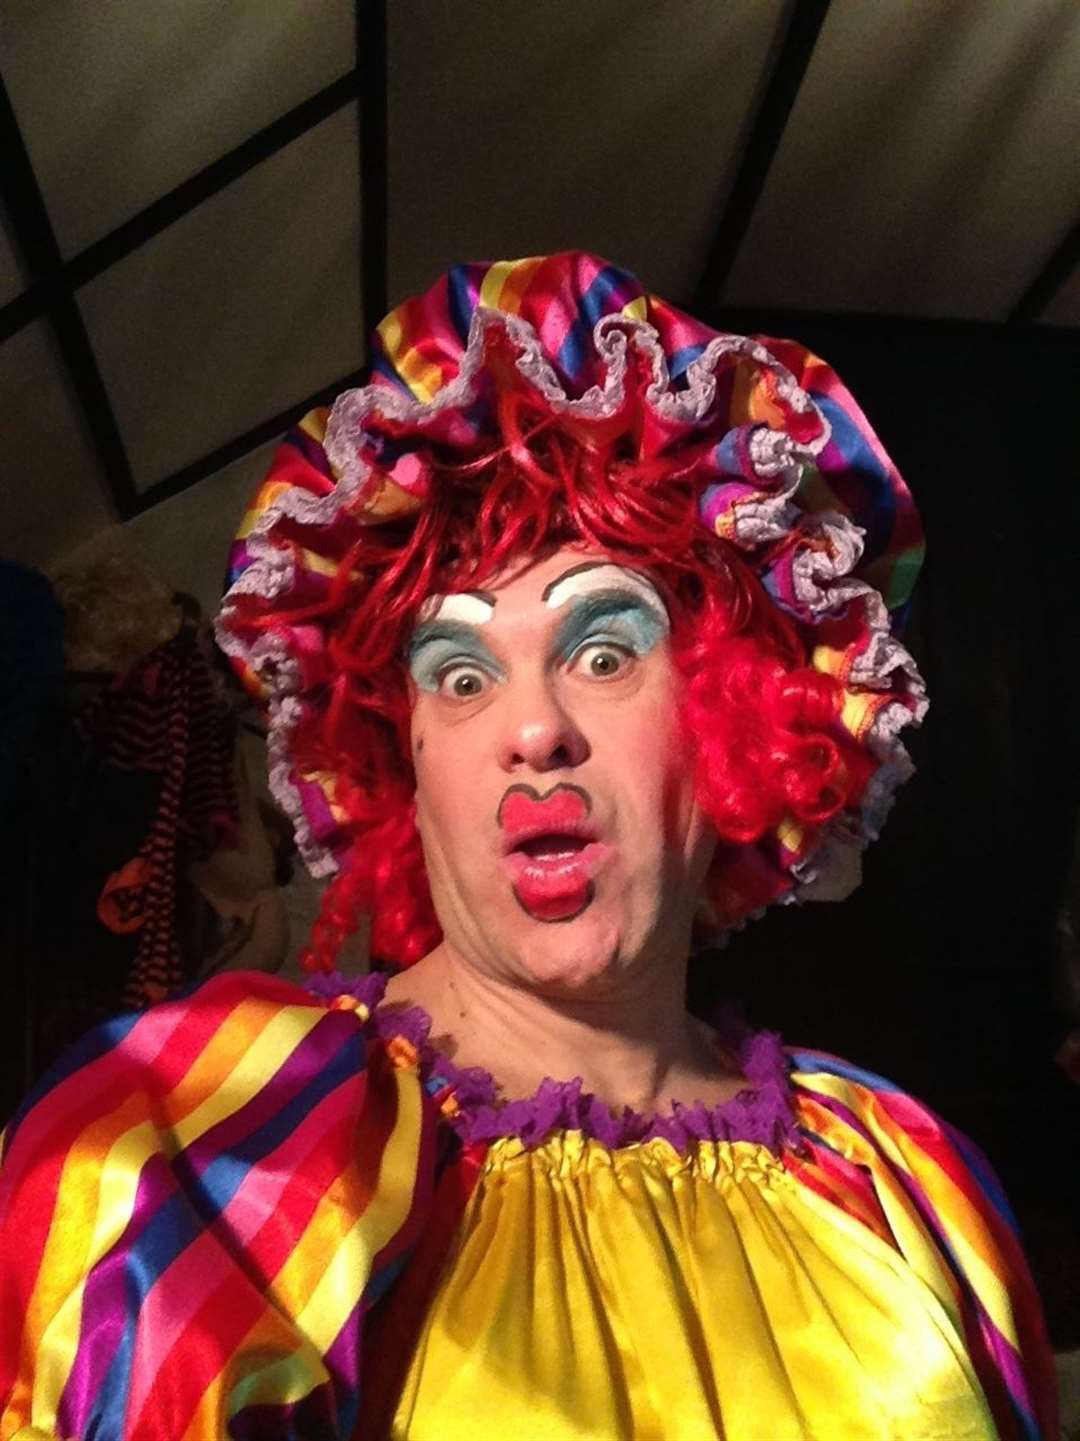 Dean Caston returns for his 12th year playing the panto dame. Here he is in costume as Dame Jolly Jacky for the virtual 2020 panto at the Oasthouse Theatre in Rainham. Picture: Rainham Theatrical Society